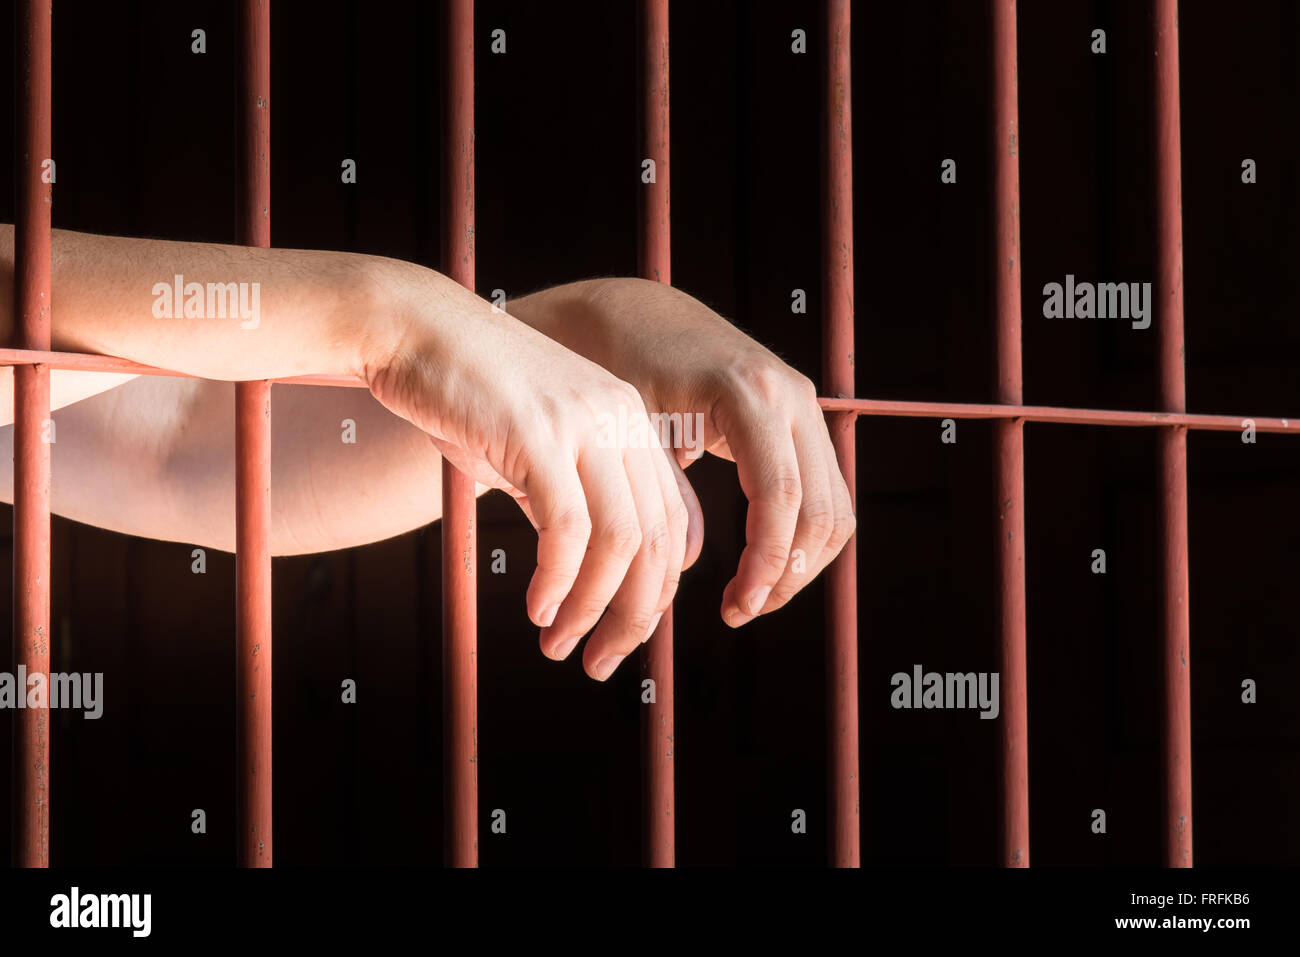 Close up hand of male muslim hanging on bar in jail. Stock Photo